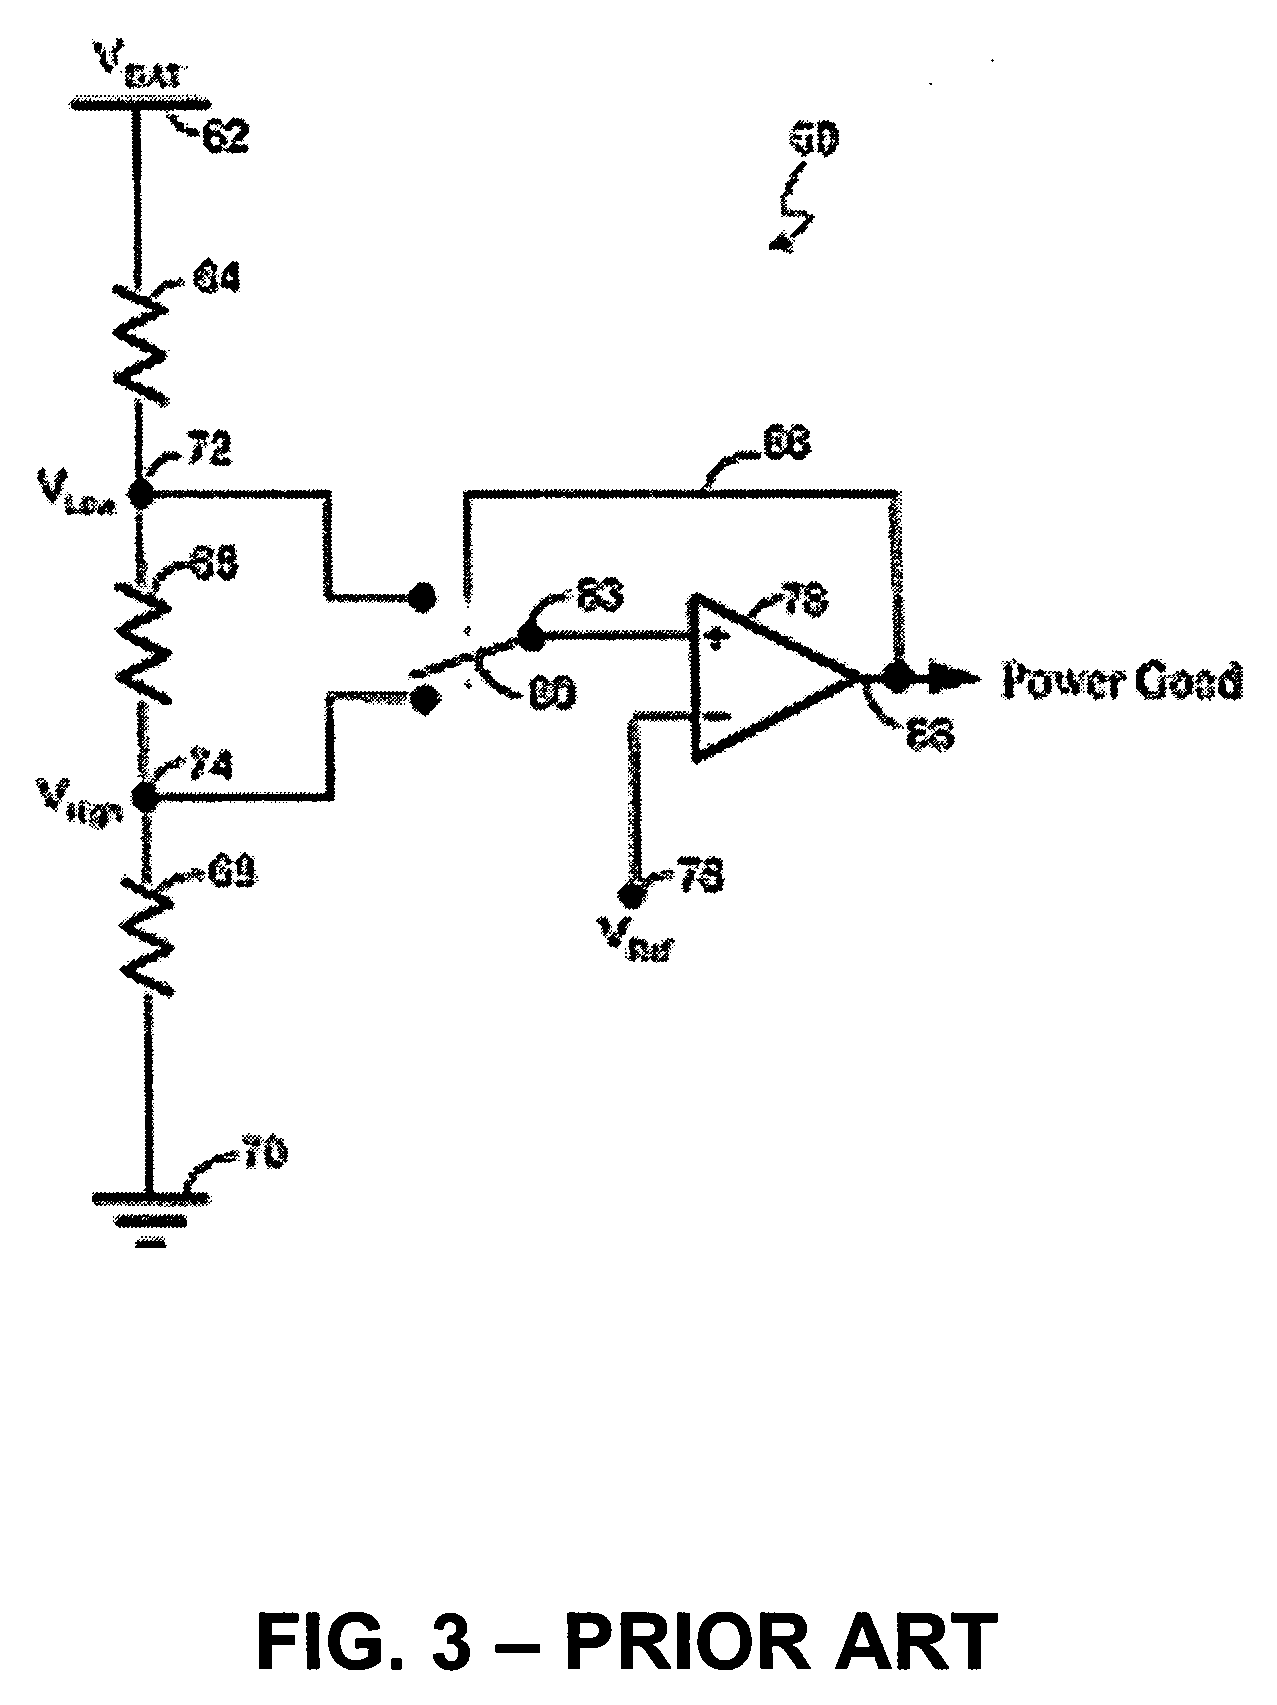 Comparator for input voltages higher than supply voltage